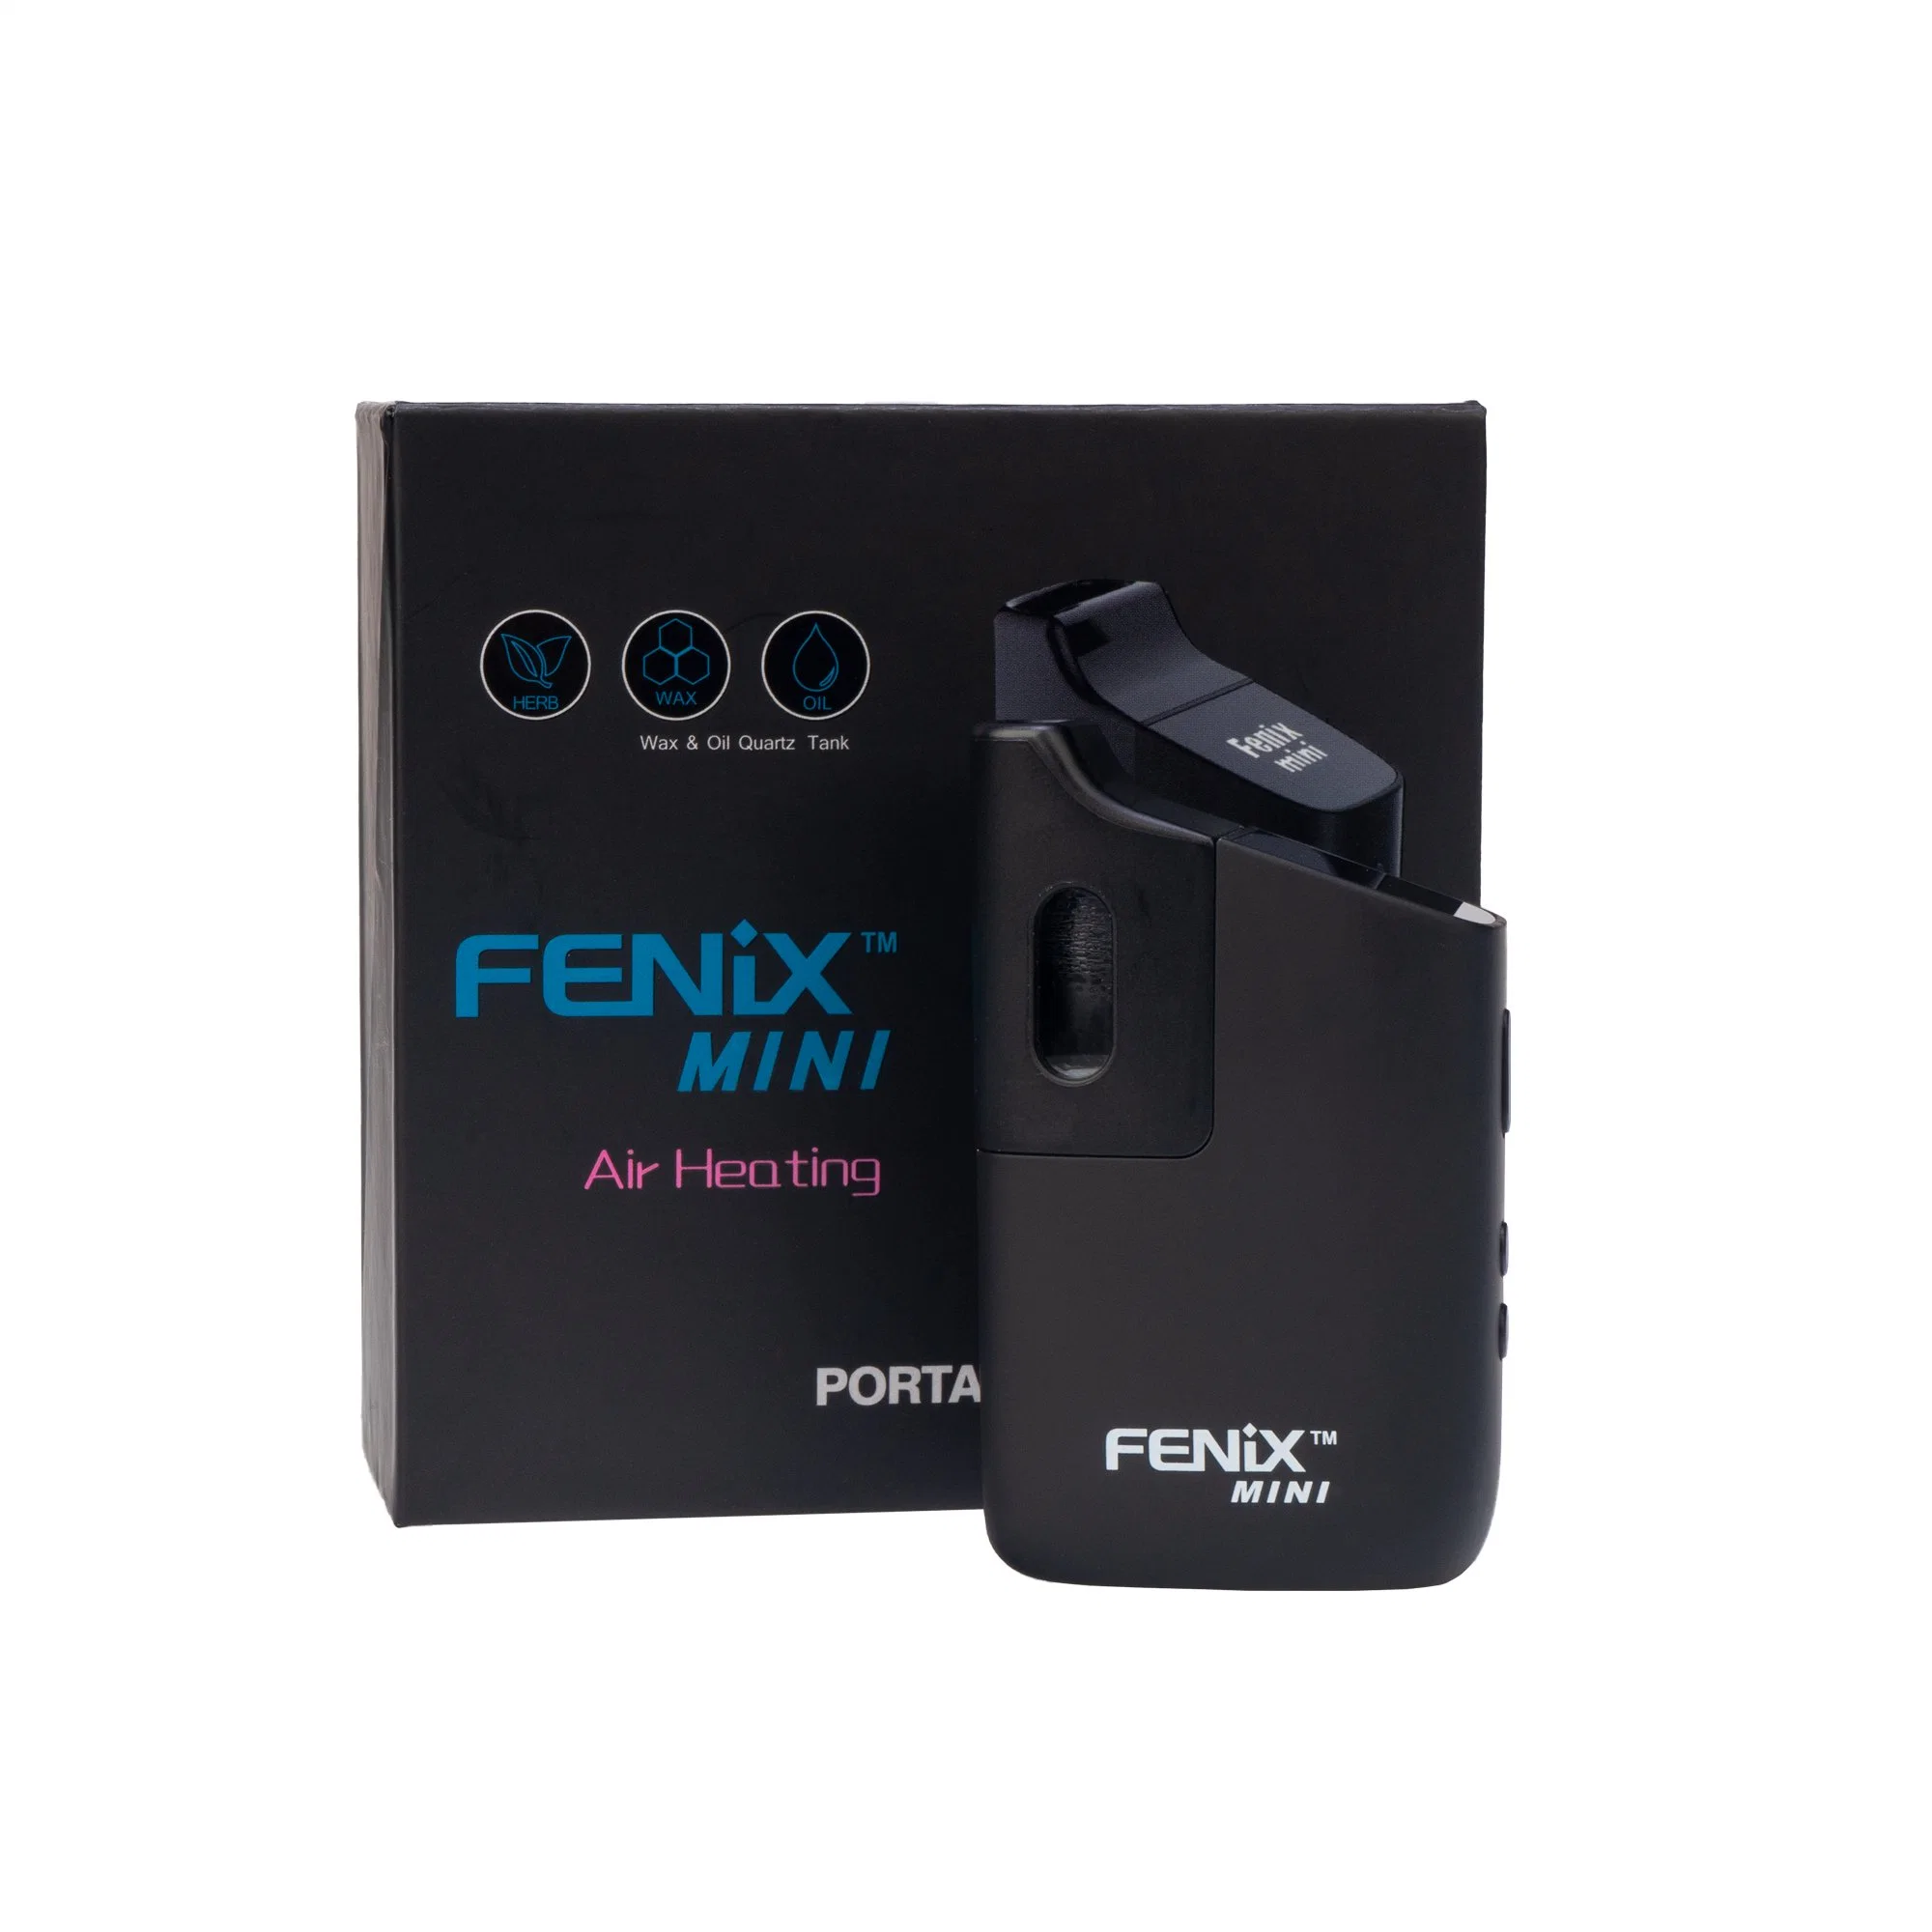 Fenix Best-Seller Fenix Mini OEM Customization OLED Display Air Convection Heating 3 in 1 Oil Wax Dry Herb Small Size Portable Vaporizer Pen